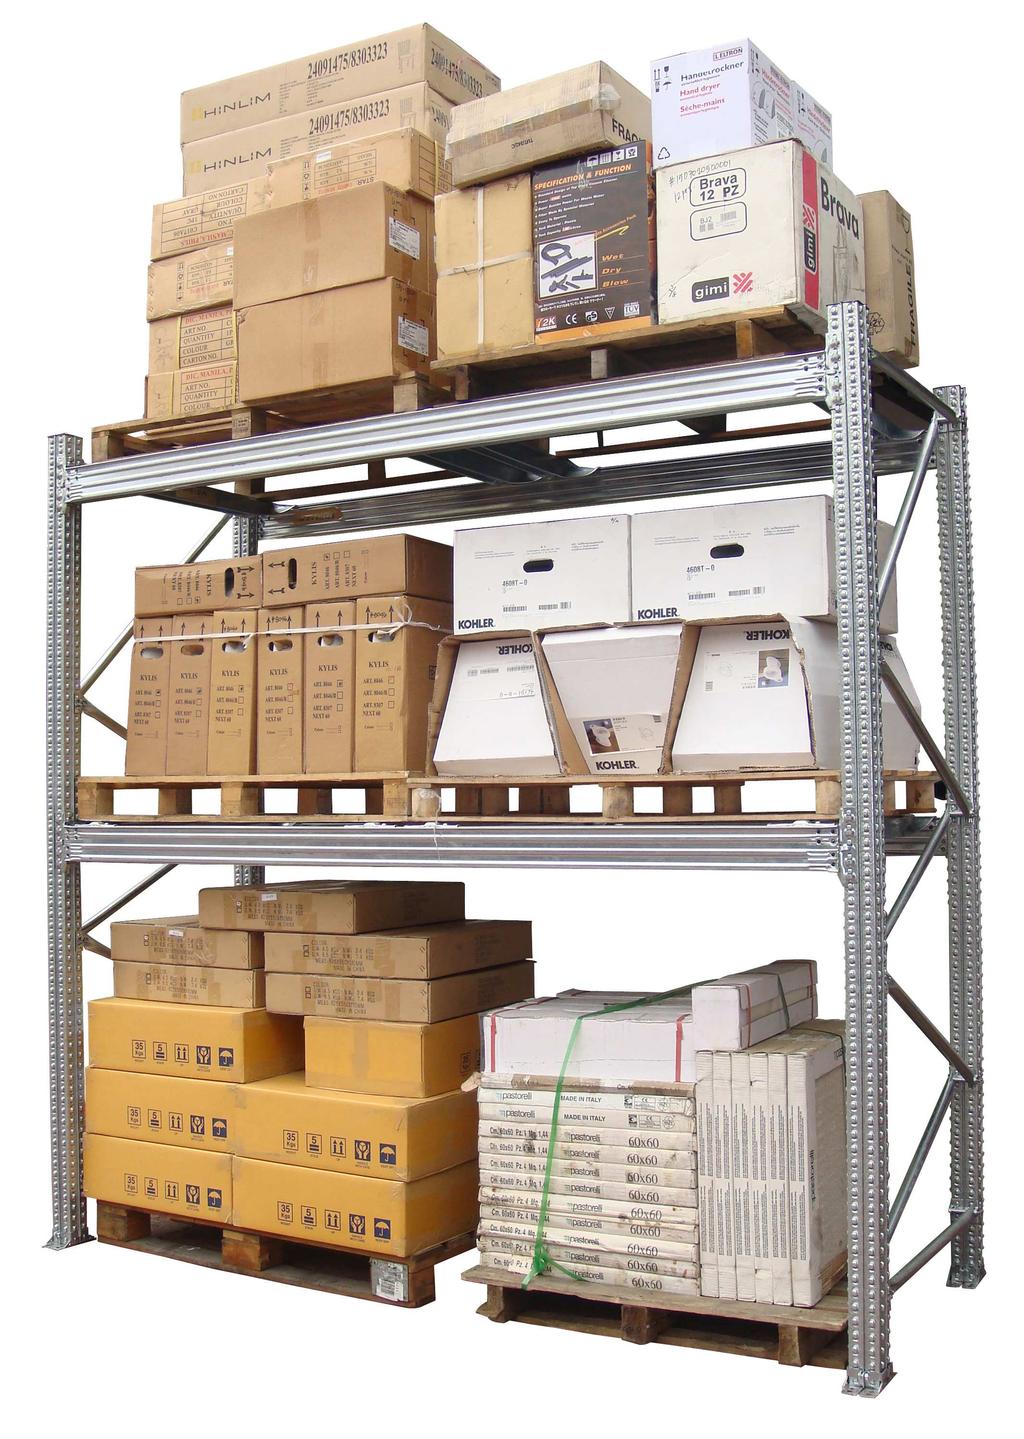 Tel. No. : 362-1111 Fax : 362-02 HEAVY DUTY SHELVING SYSTEM Super Heavy Duty Shelving / Racking System Super is a heavy duty shelving / racking system which is also ideal for pallet racking.